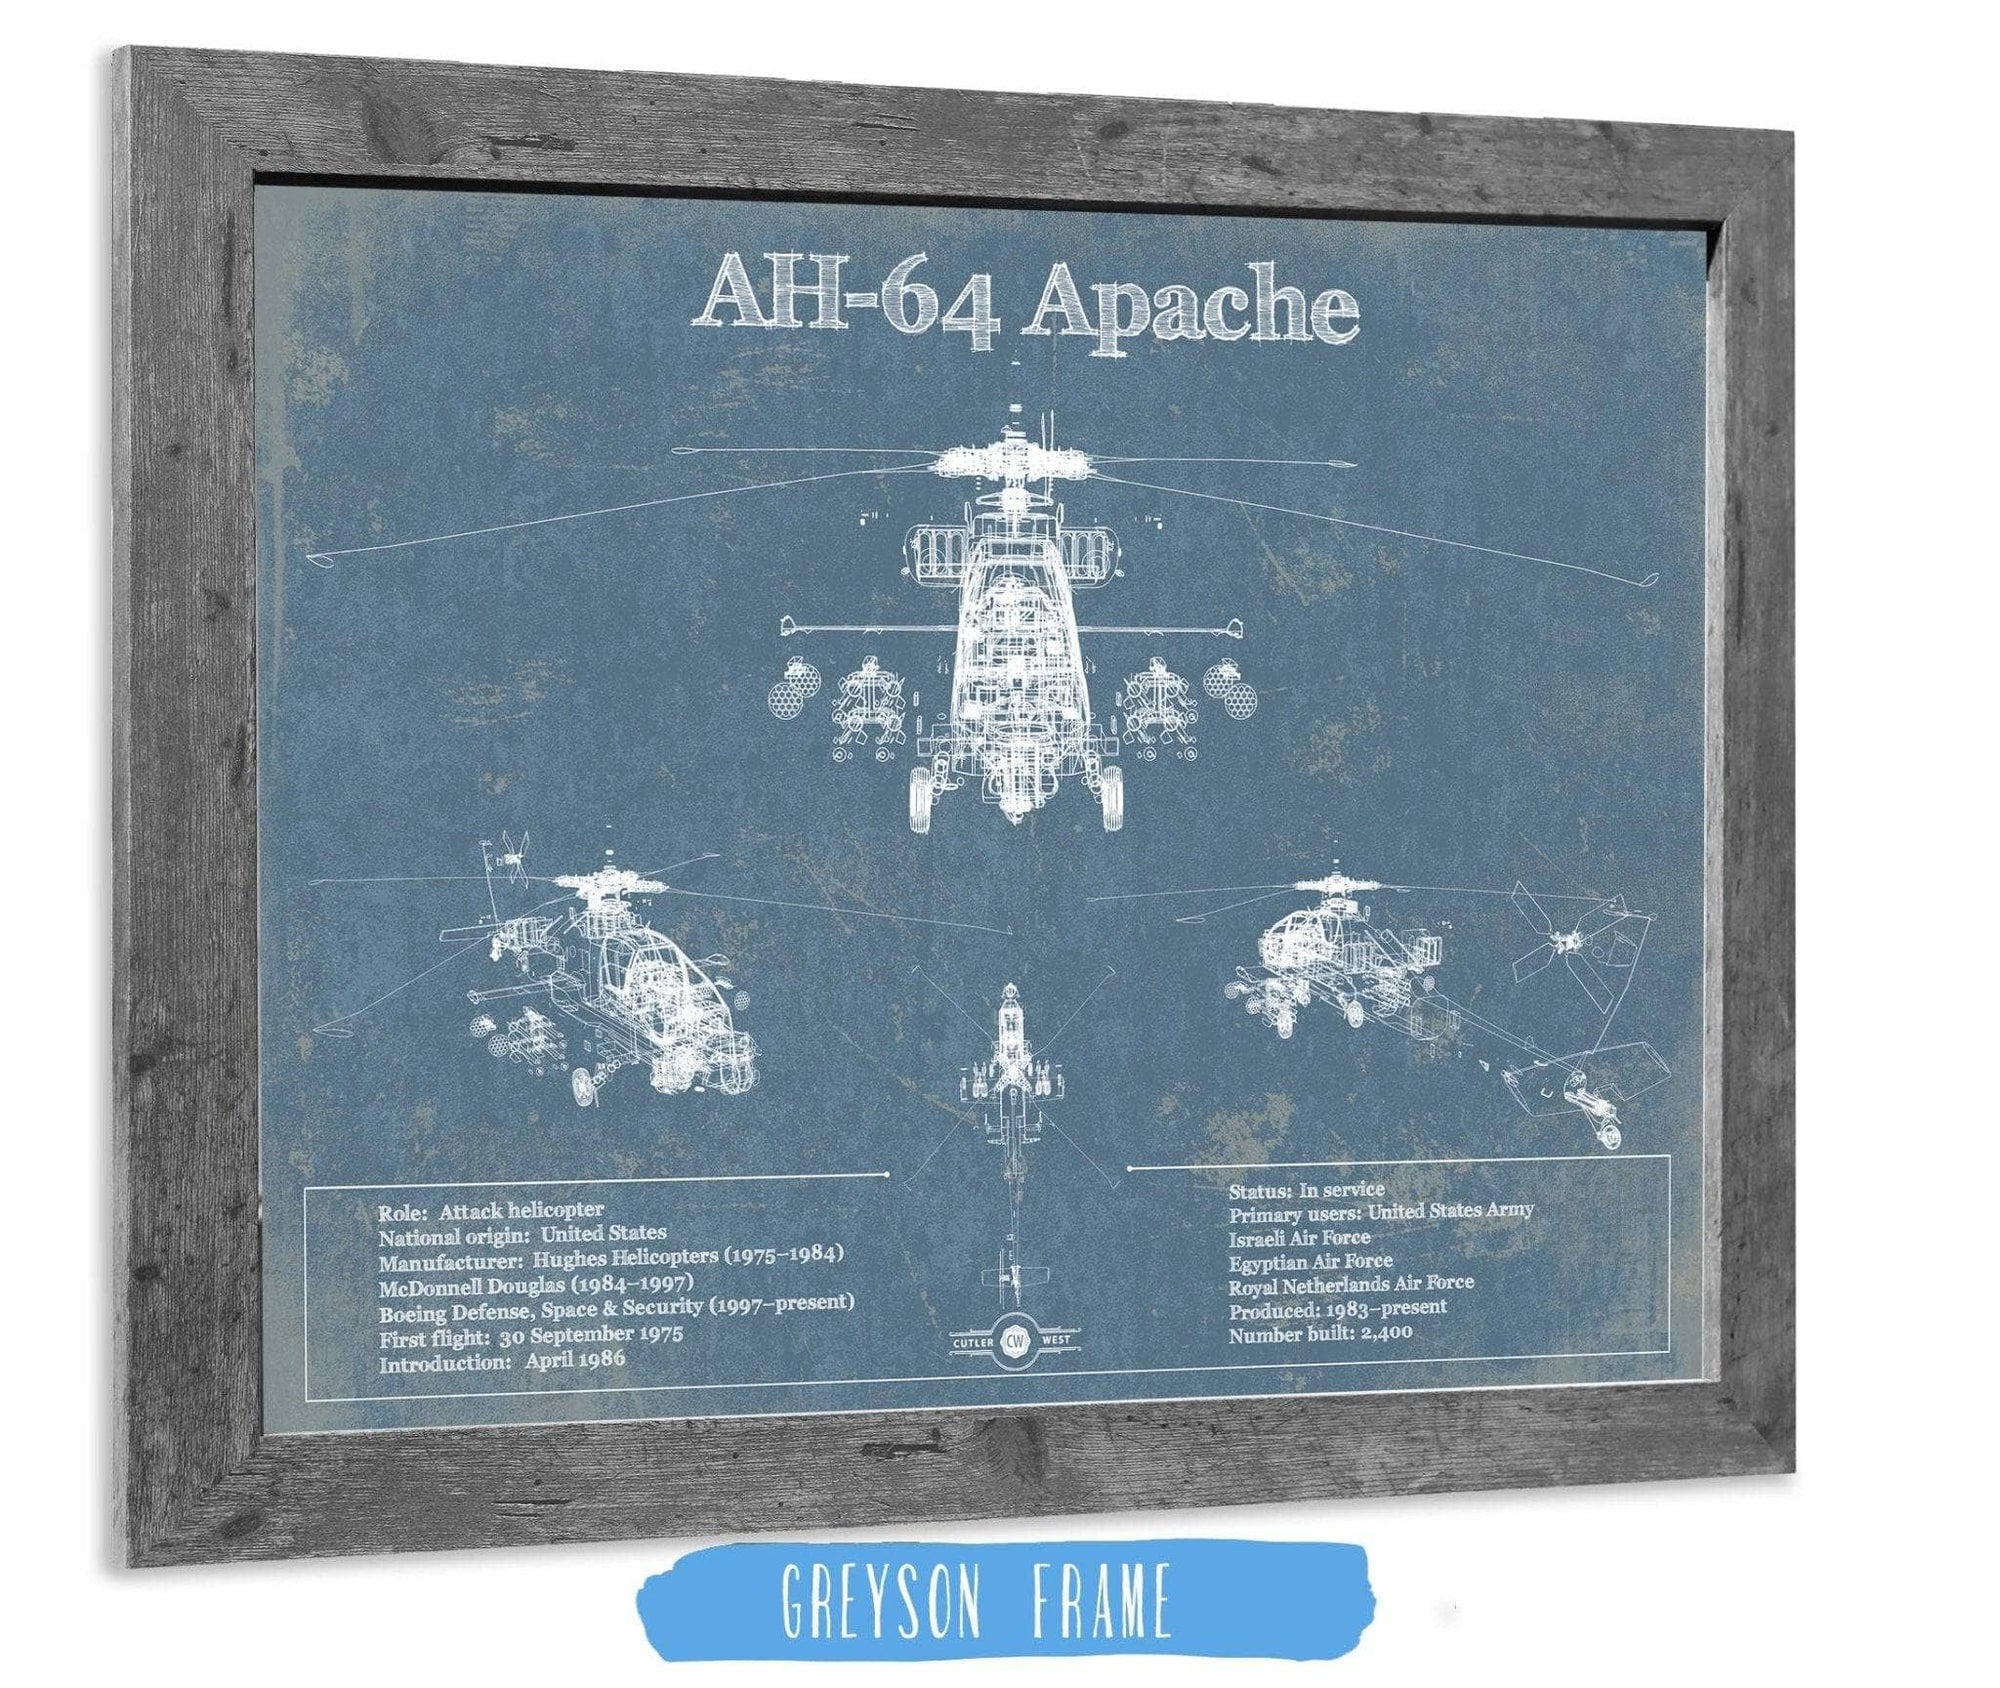 Cutler West Best Selling Collection 14" x 11" / Greyson Frame AH-64 Apache Helicopter Vintage Aviation Blueprint Military Print 797415875-TOP